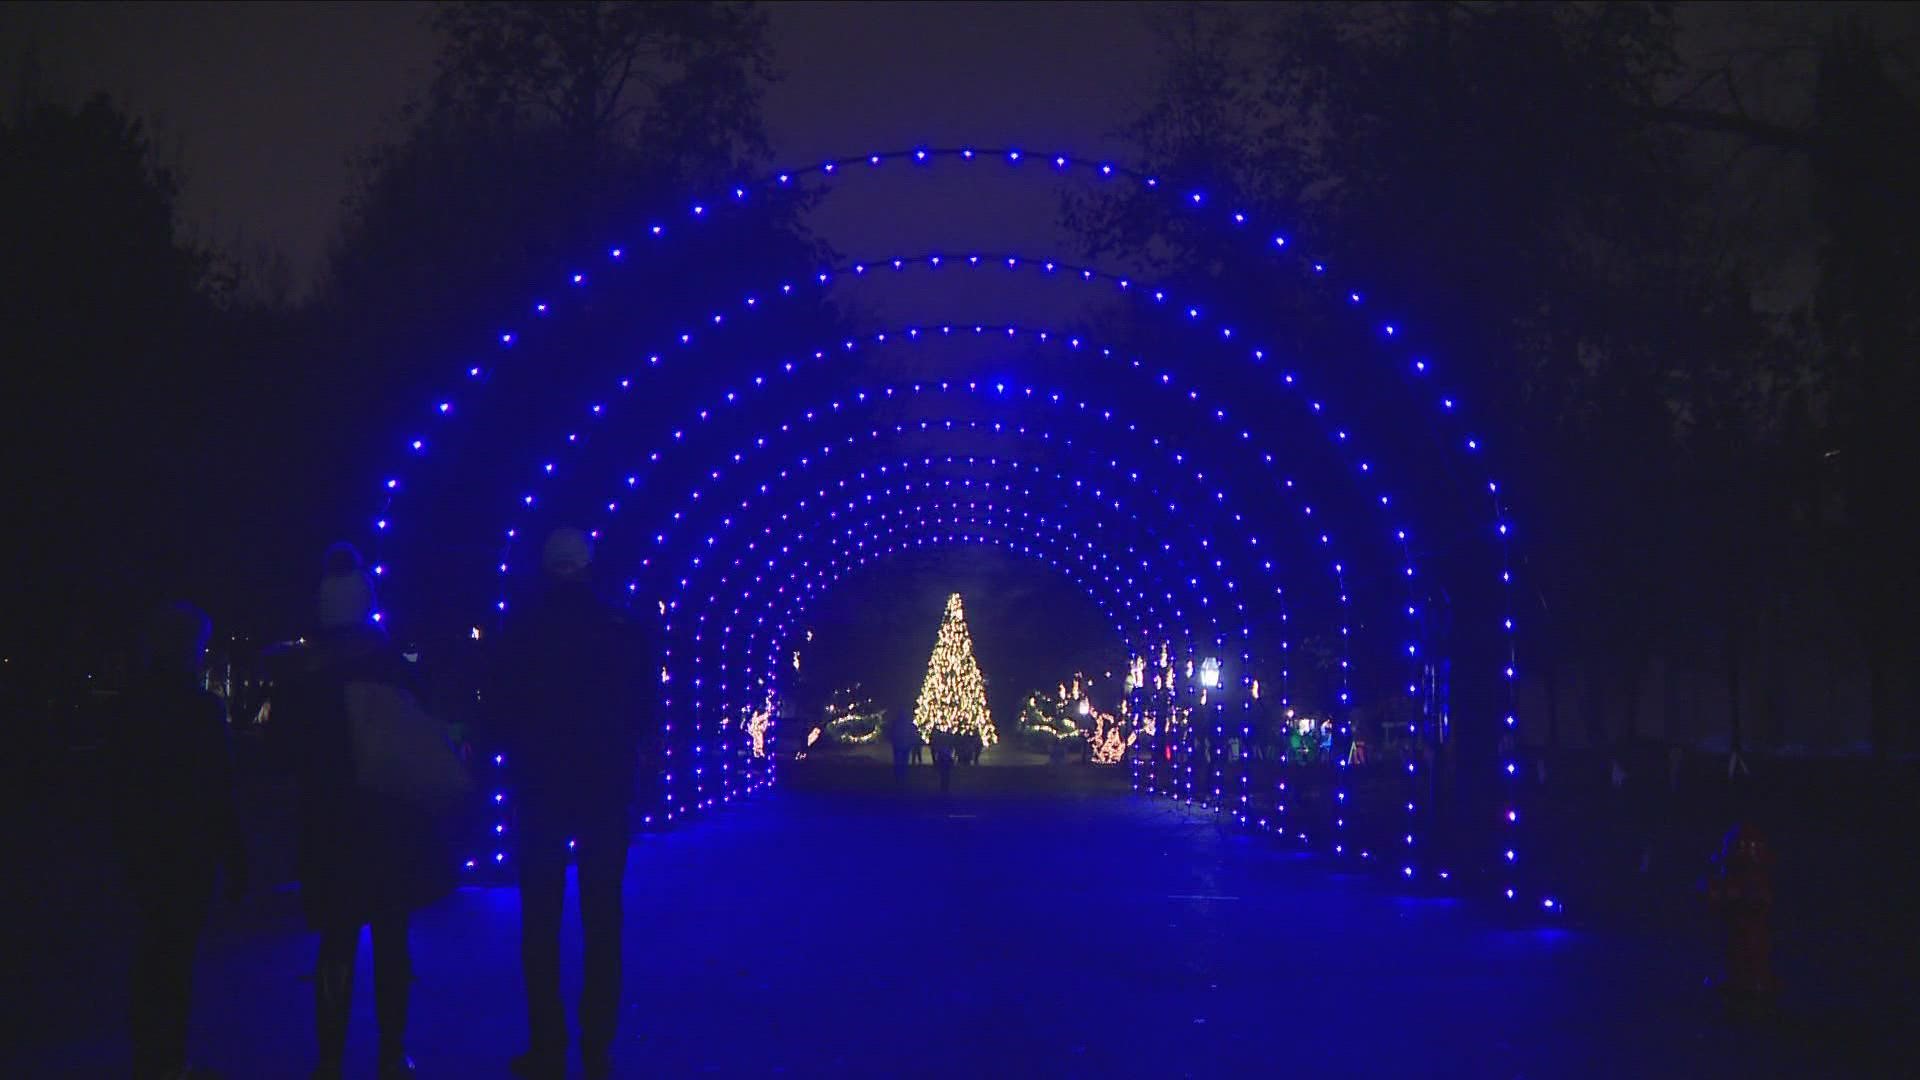 Zoo Lights are open most weekends through December, plus the whole last week of the month, from 5:30 p.m. to 9 p.m.